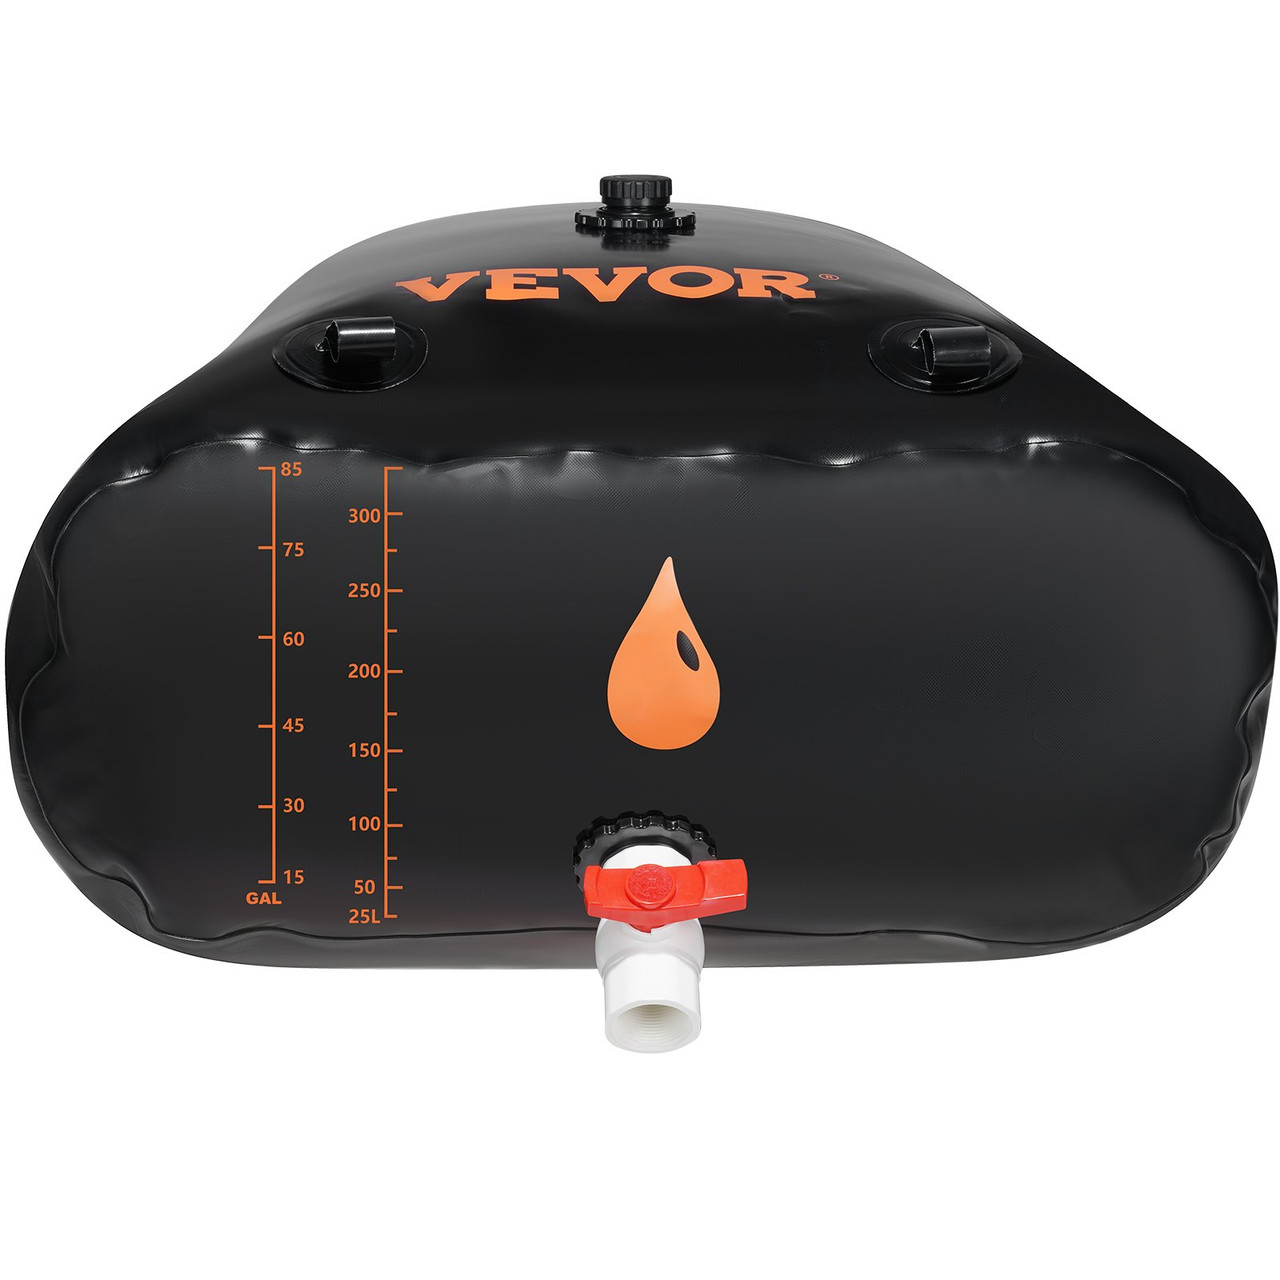 VEVOR Water Tank Bladder, 87 Gallon Large Capacity, PVC Collapsible Water Bladder Including Spigots and Overflow Kit, Portable Water Storage Bladder for Garden Water Catcher, Black